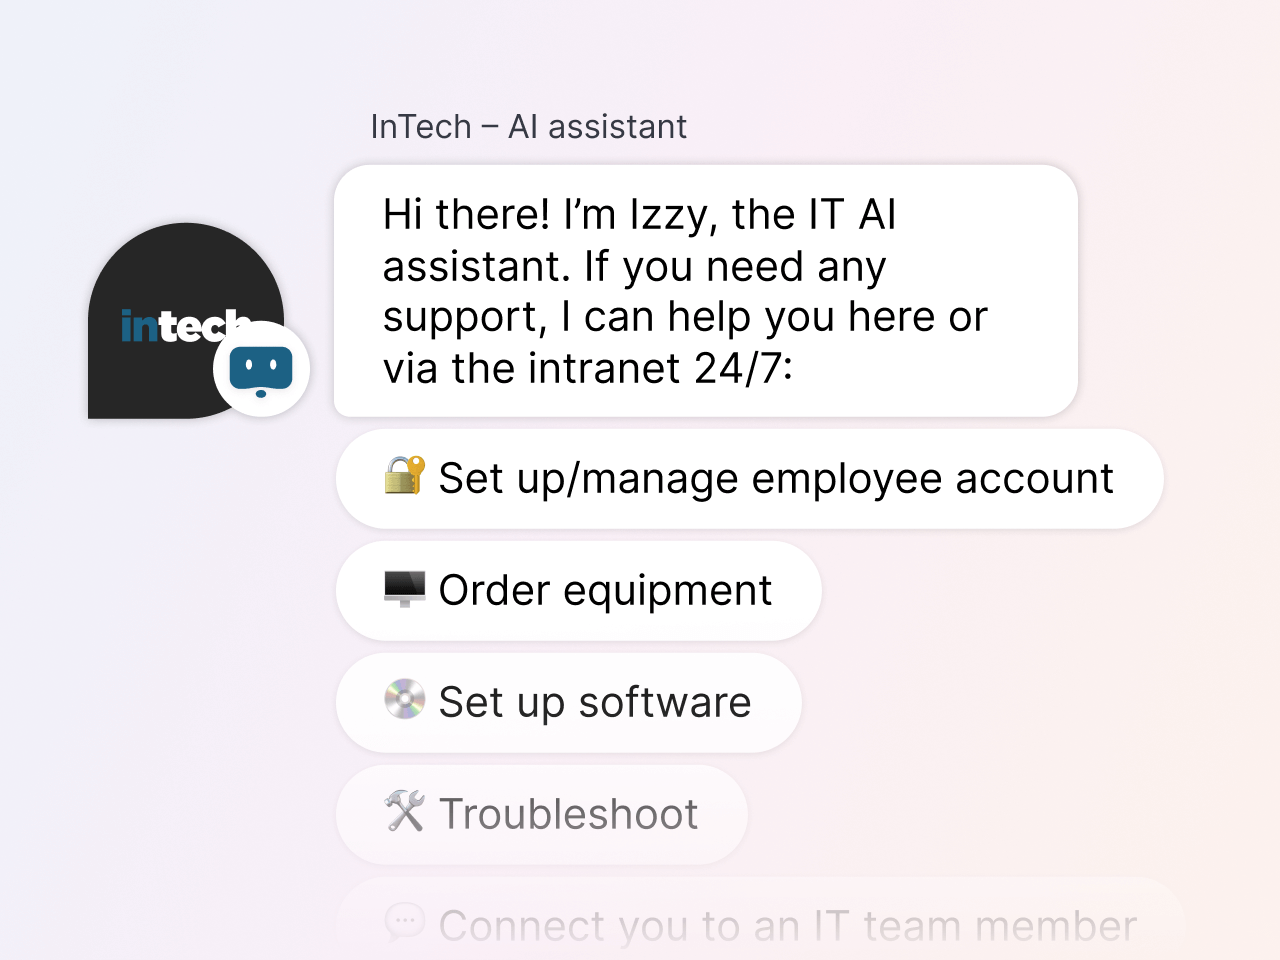 Messaging an AI assistant as part of a company's ITSM tools